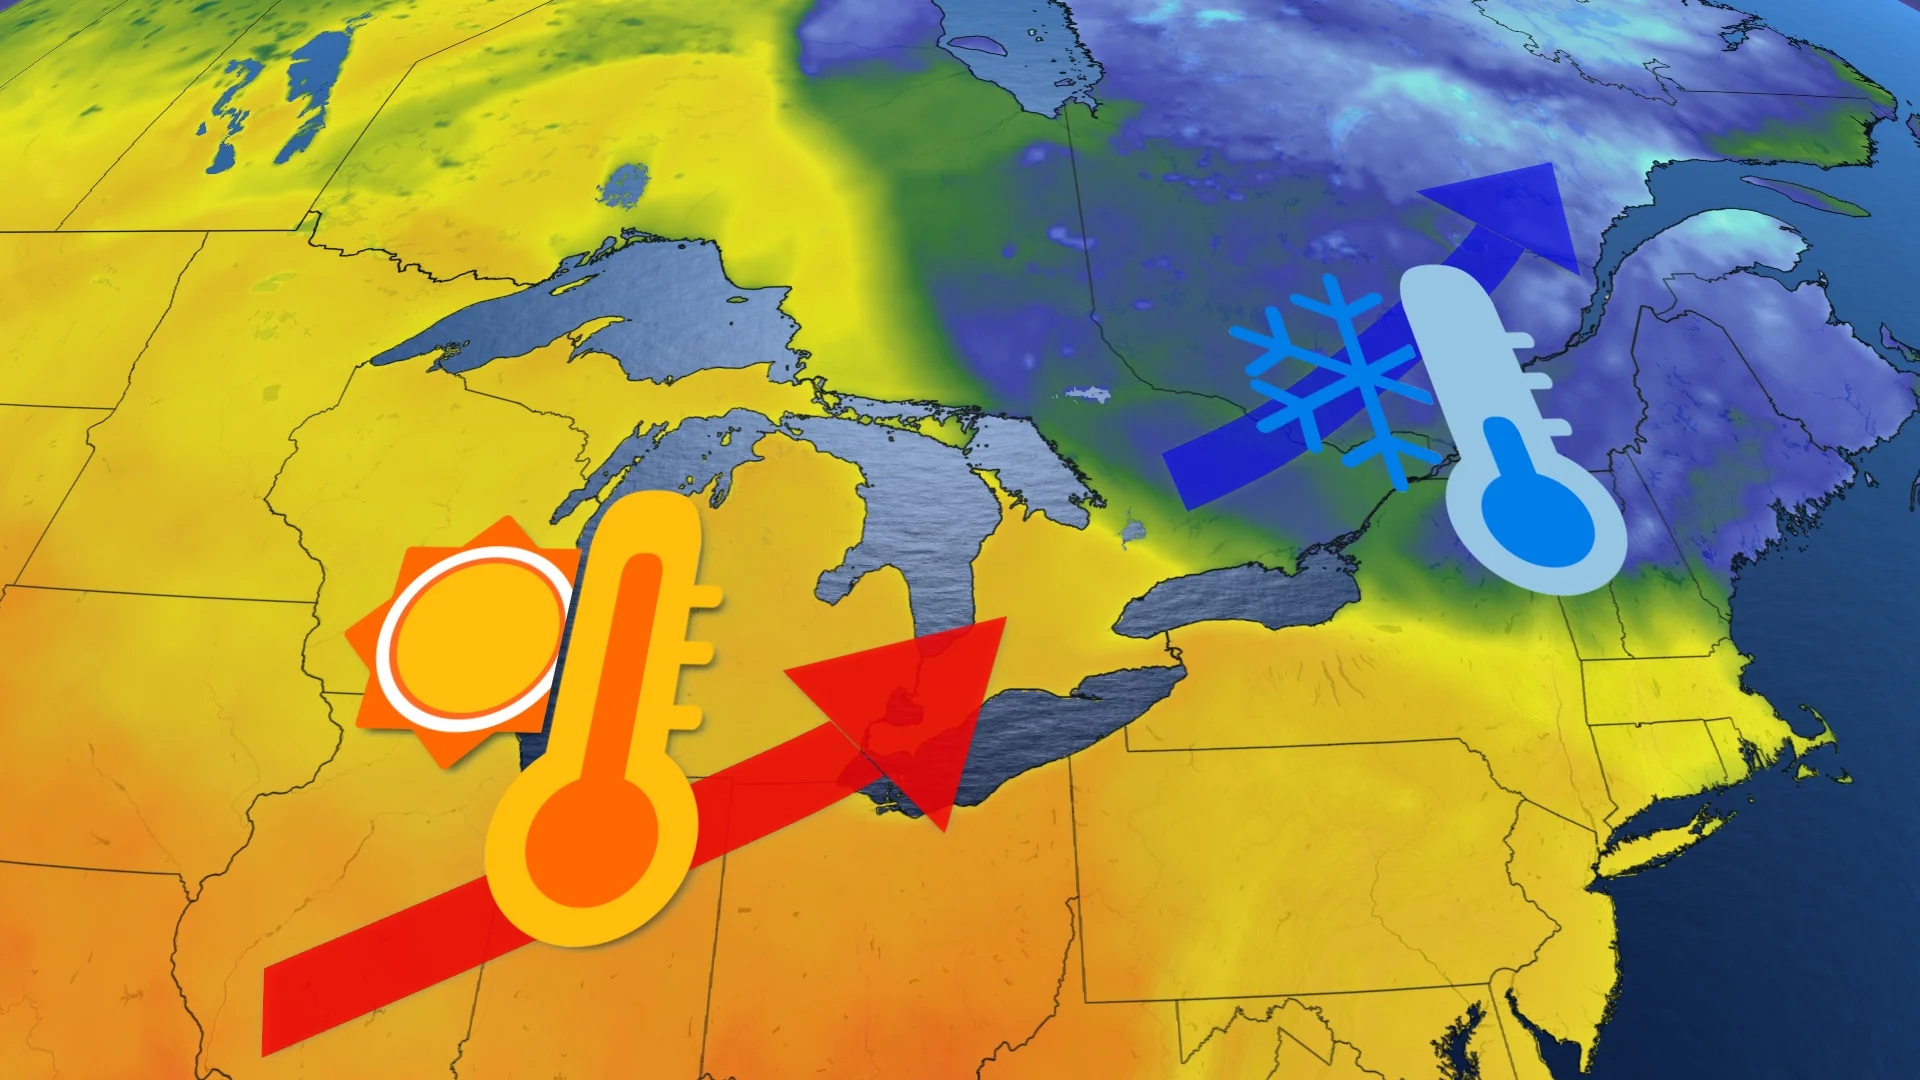 Cooldown means another frost chance in Ontario, but will this be it for spring?